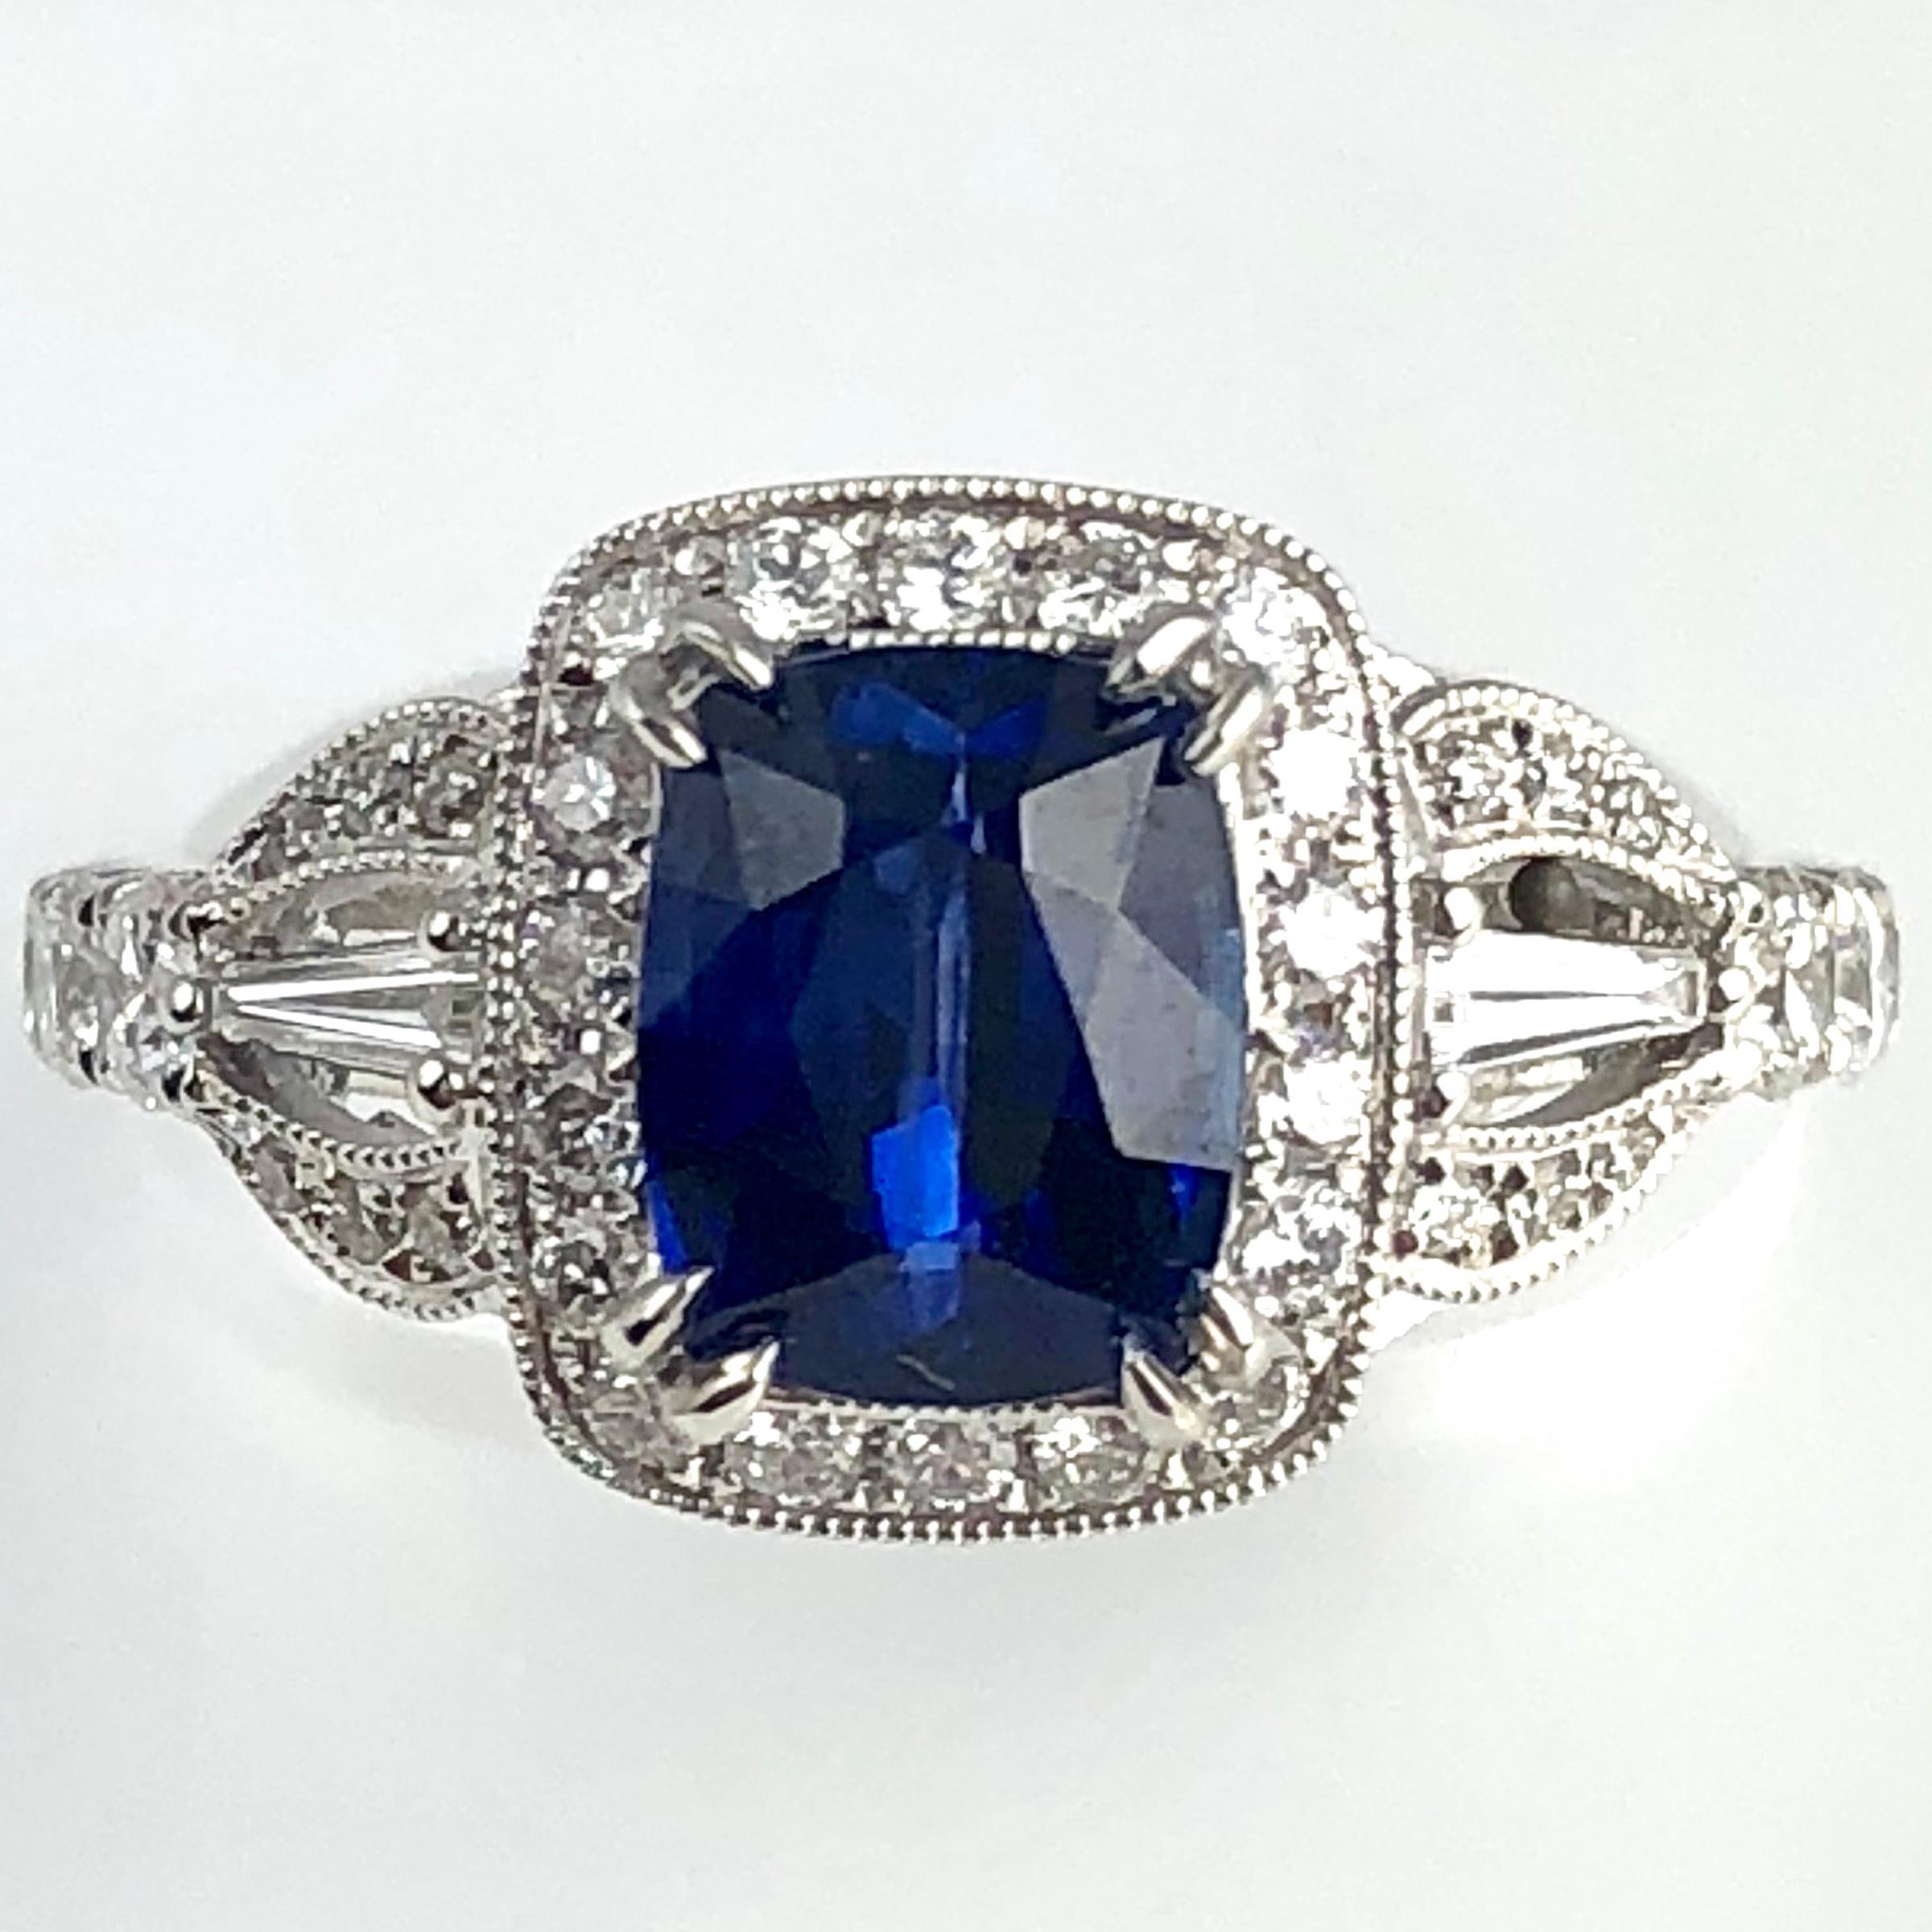 (DiamondTown) With a GIA Certified 1.93 carat cushion cut fine Ceylon sapphire center, and 0.81 carats white diamonds, this ring shines from every angle. Intricate hand engraved milgrain work throughout adds to the charm of the piece.

GIA